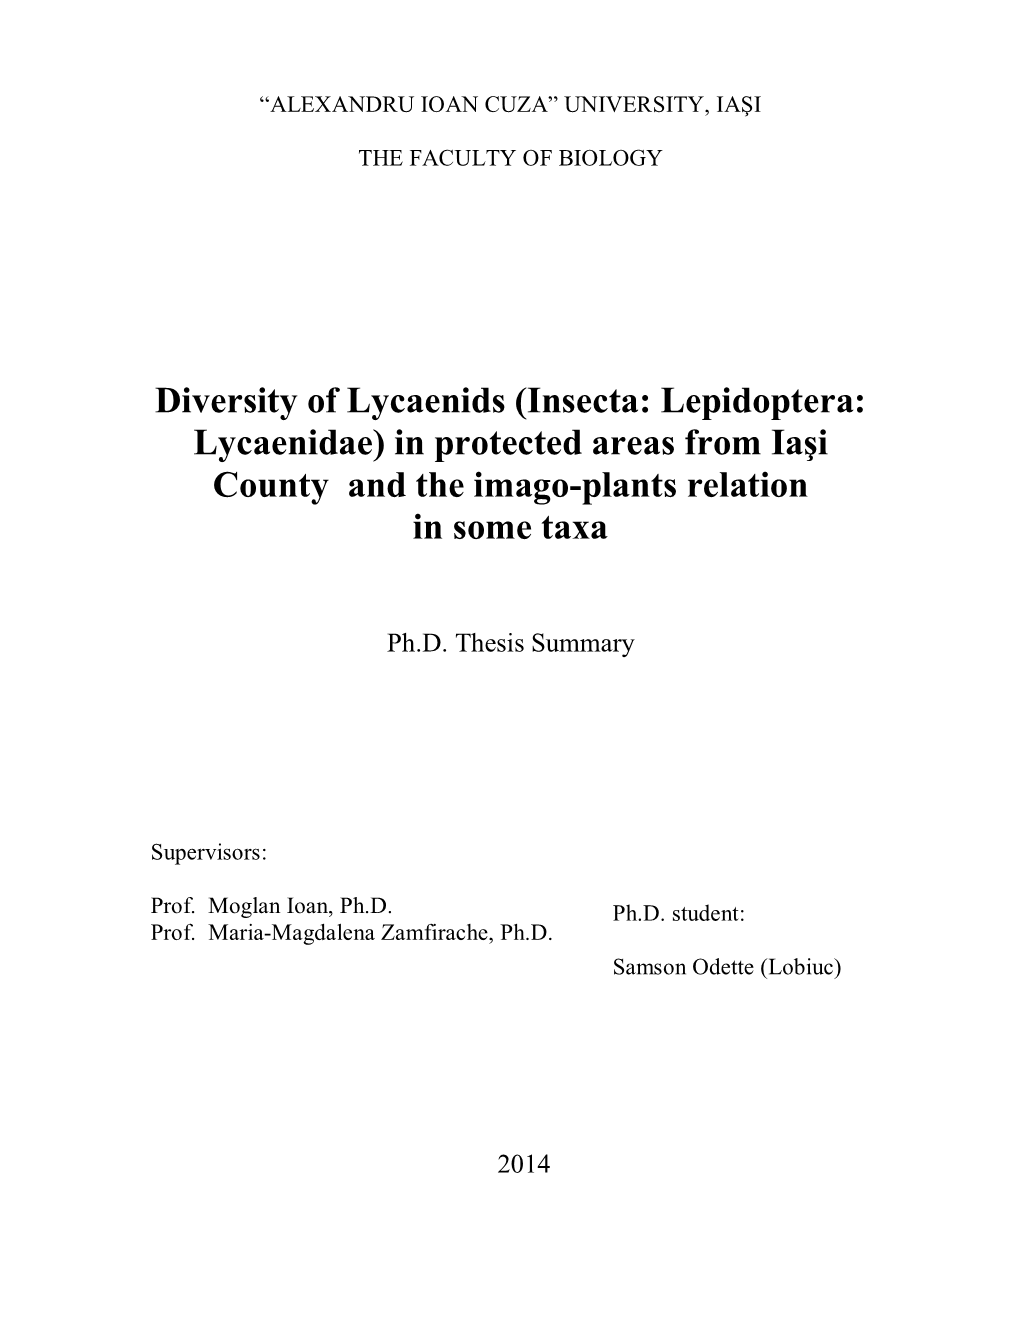 Insecta: Lepidoptera: Lycaenidae) in Protected Areas from Iaşi County and the Imago-Plants Relation in Some Taxa